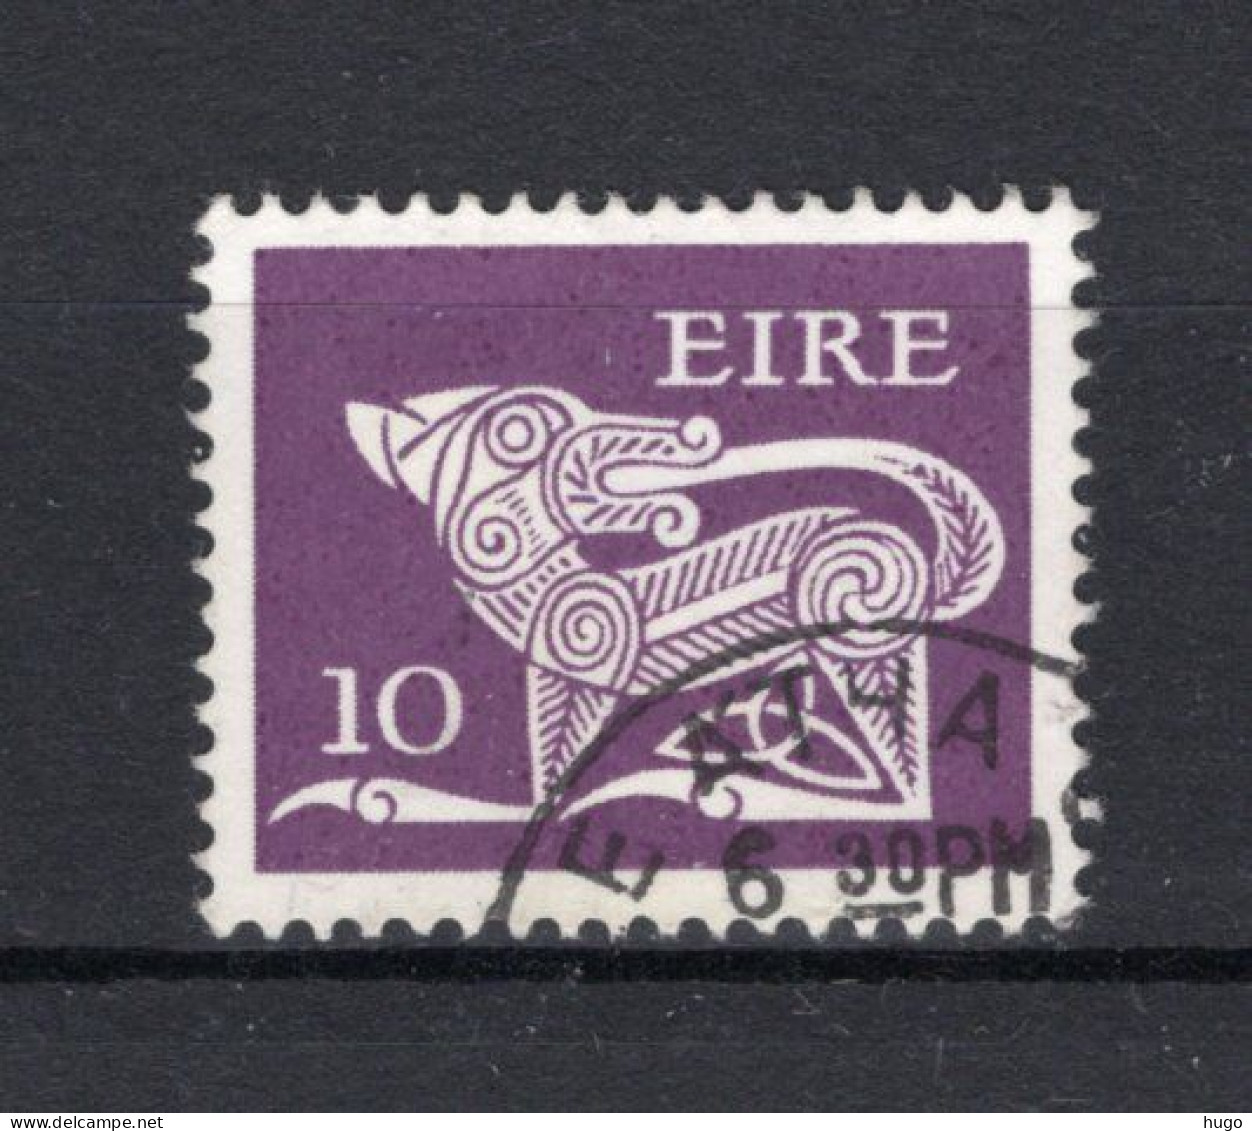 IERLAND Yt. 360° Gestempeld 1977 - Used Stamps